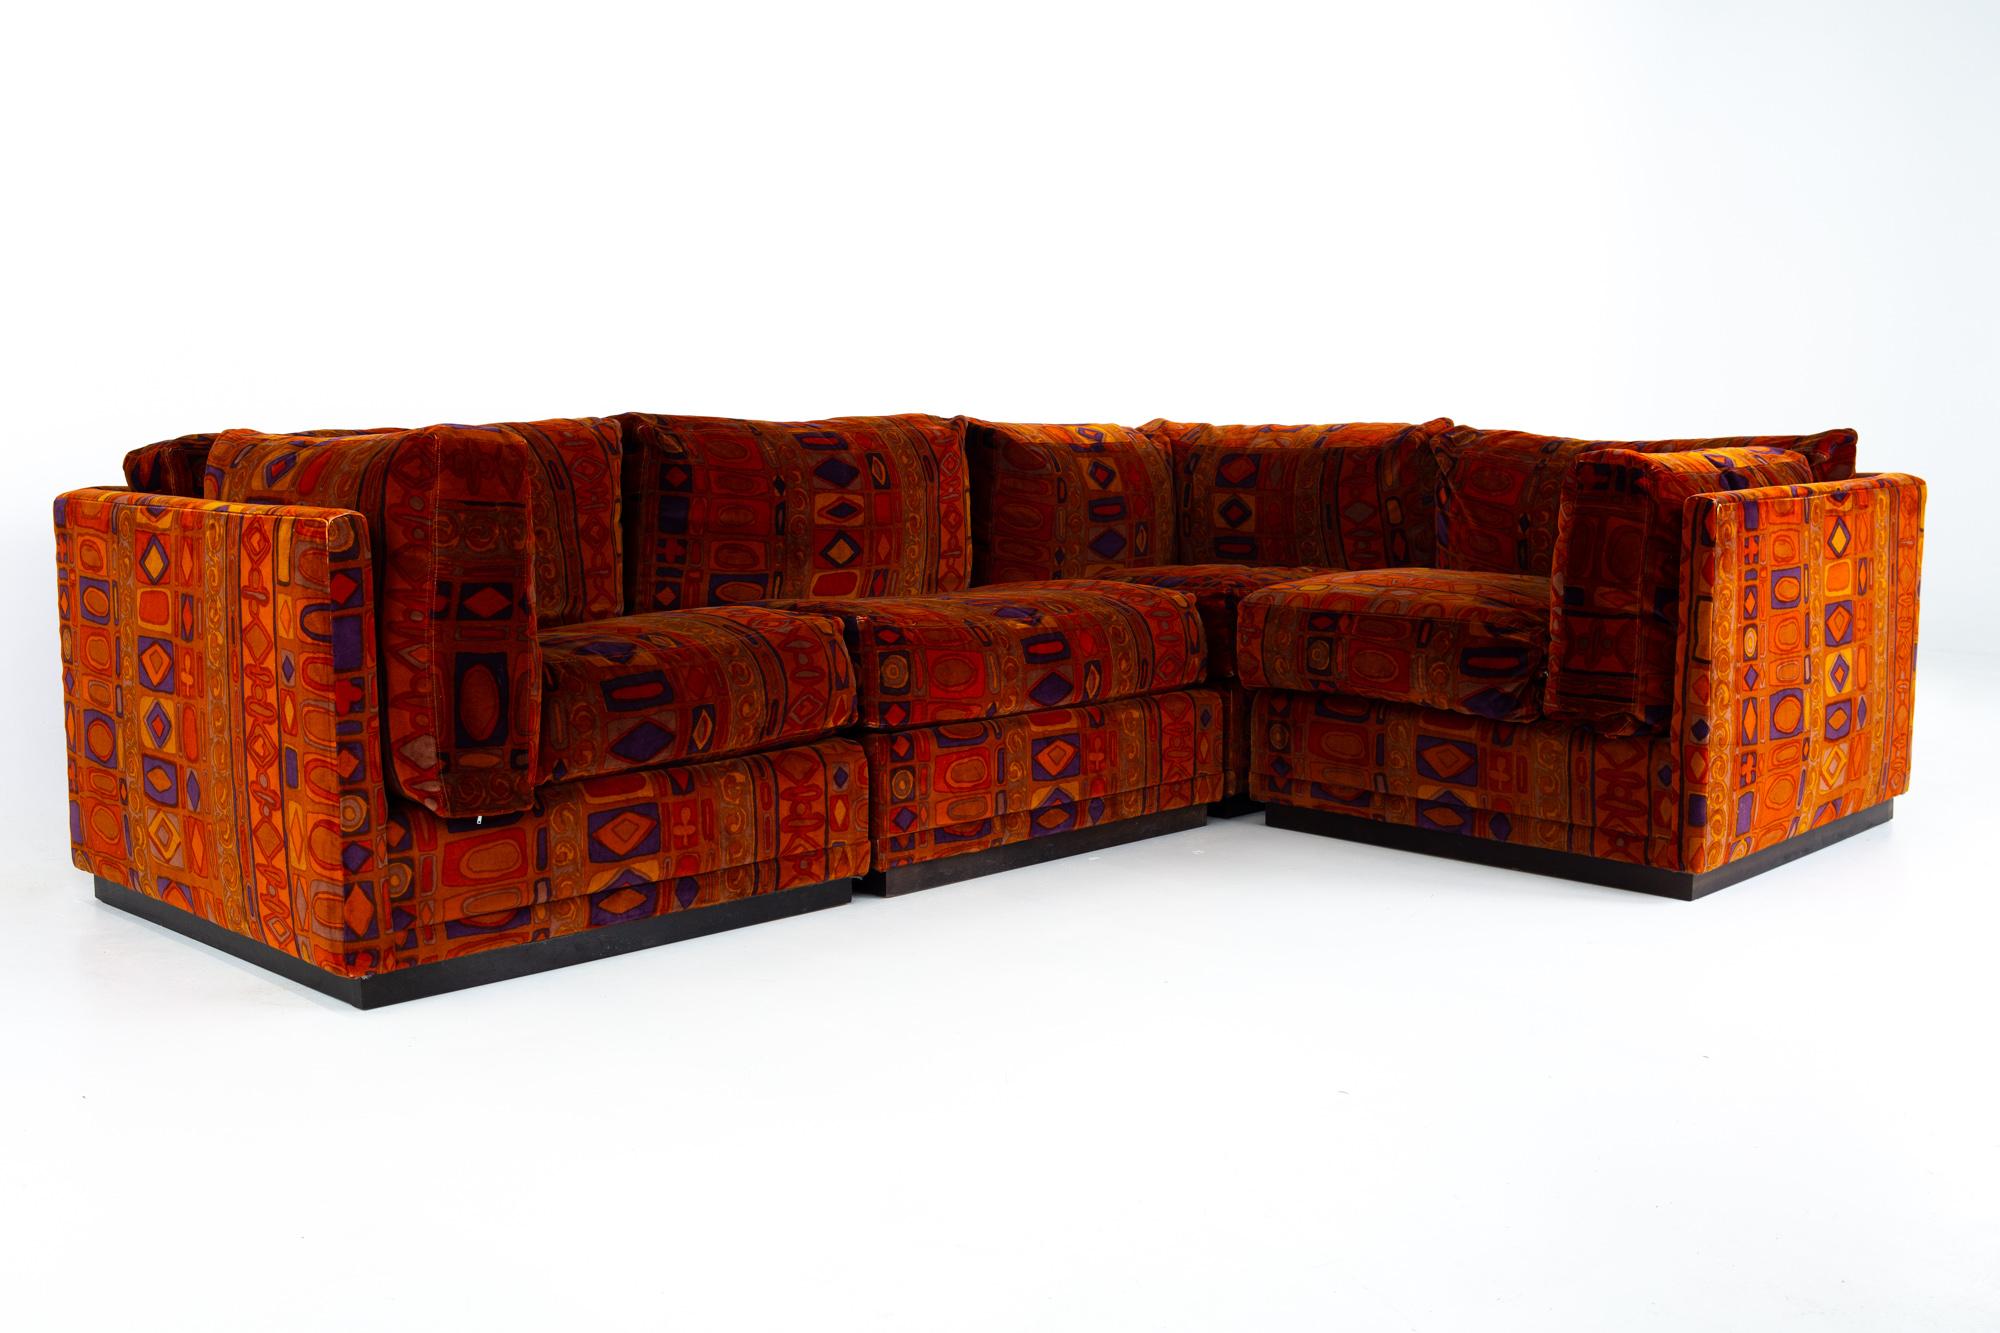 Jack Lenor Larsen for Directional mid century sectional sofa

Sofa measures: 106.75 wide x 72.25 deep x 25.75 high, with a seat height of 10.25 inches

All pieces of furniture can be had in what we call restored vintage condition. That means the